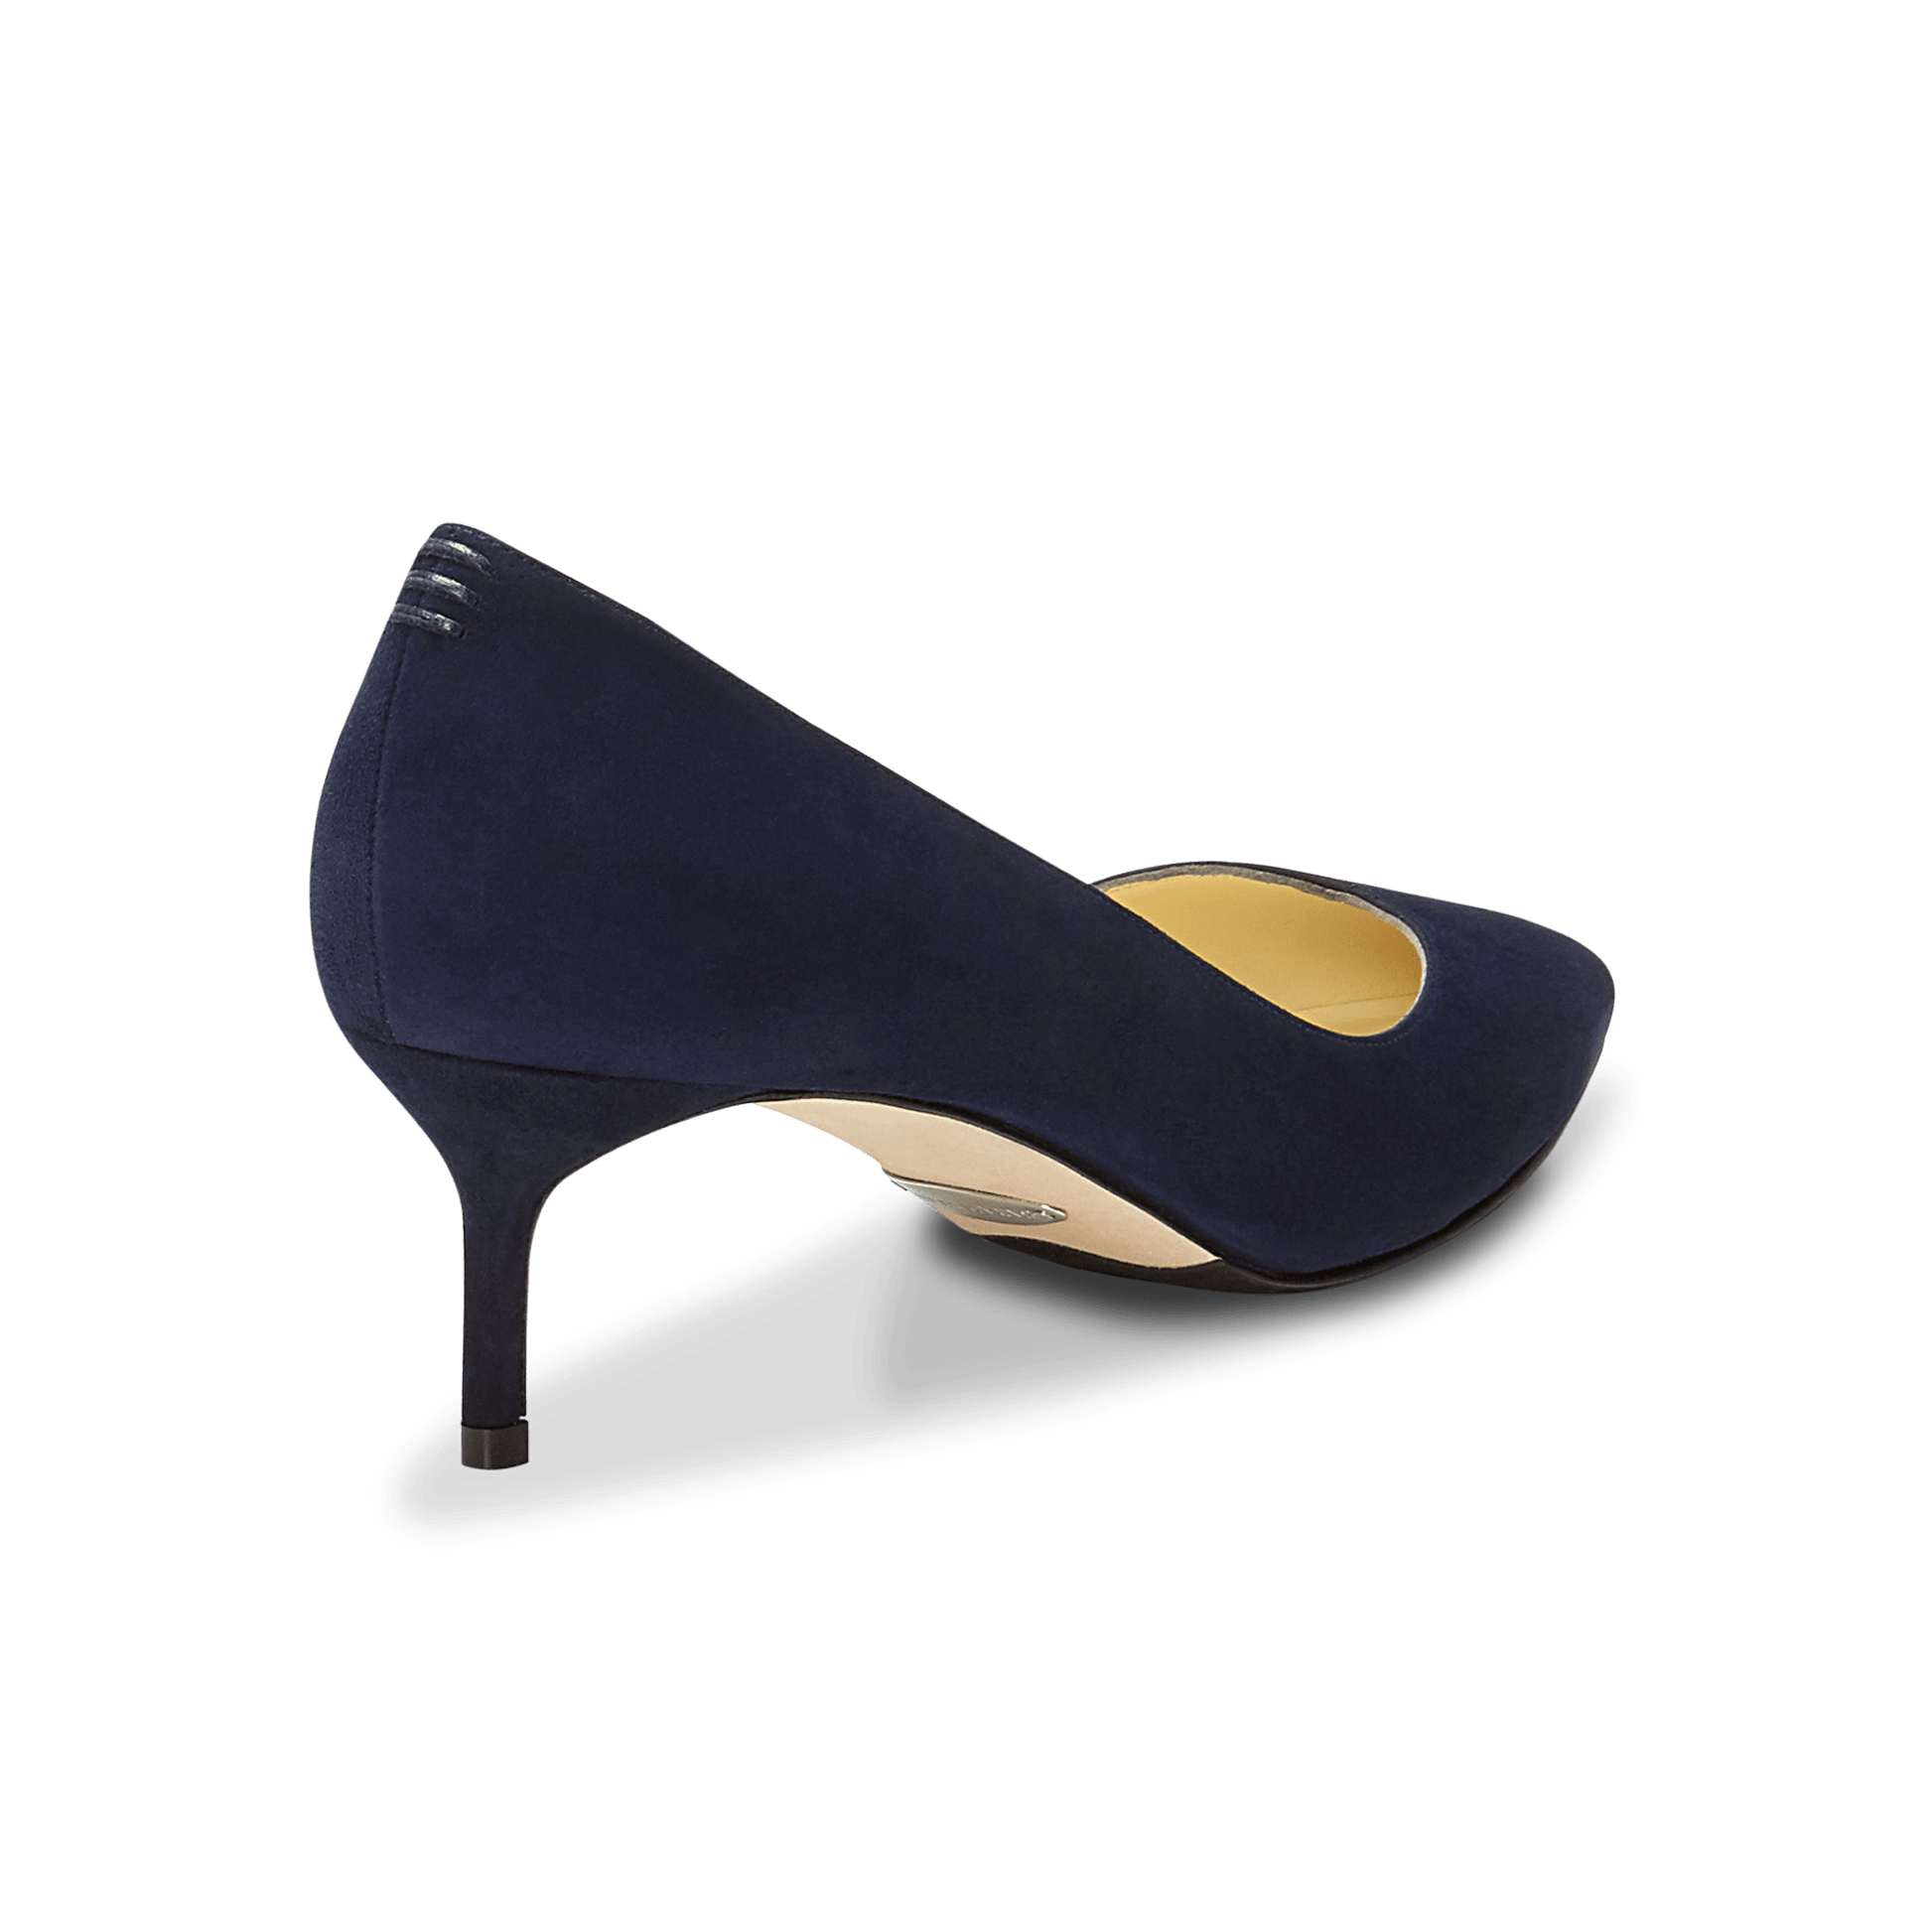 Sarah Flint Perfect Round Toe Pump 70 Heels in Black Suede | Luxury Heels for Women | Handcrafted Designer Shoes Made in Italy